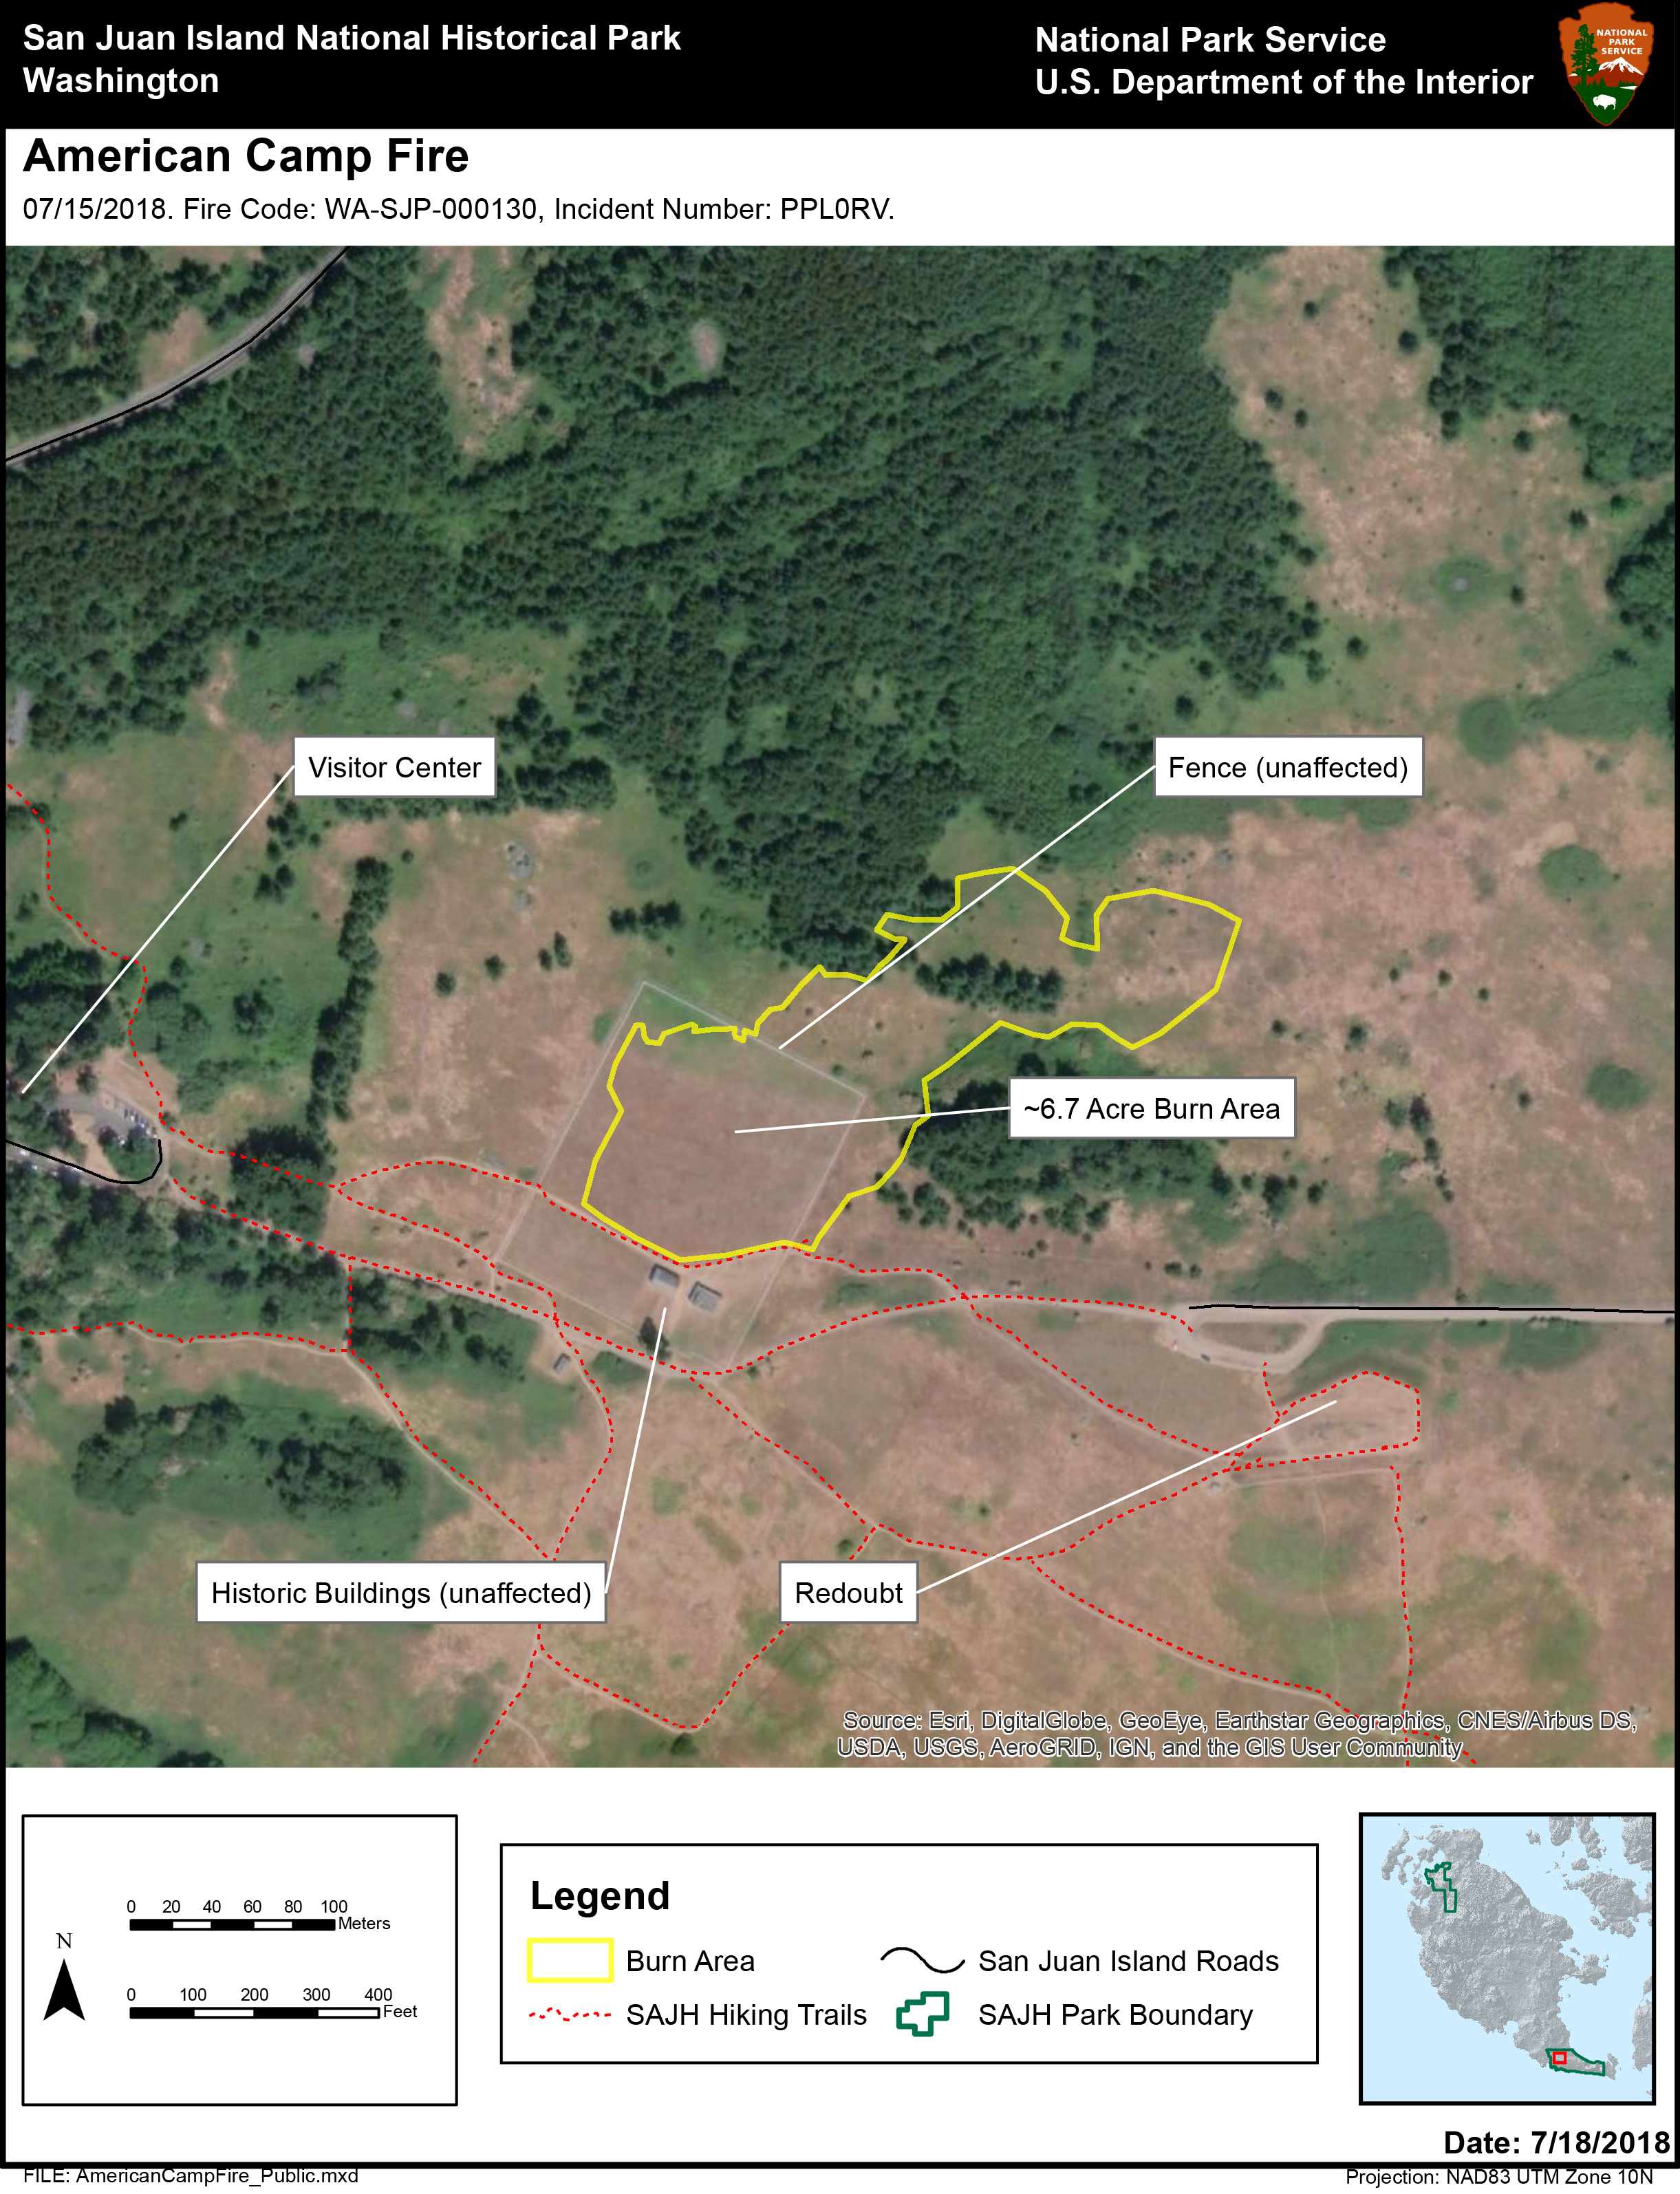 A map detailing the fire damage from the American Camp wildfire on July 15th